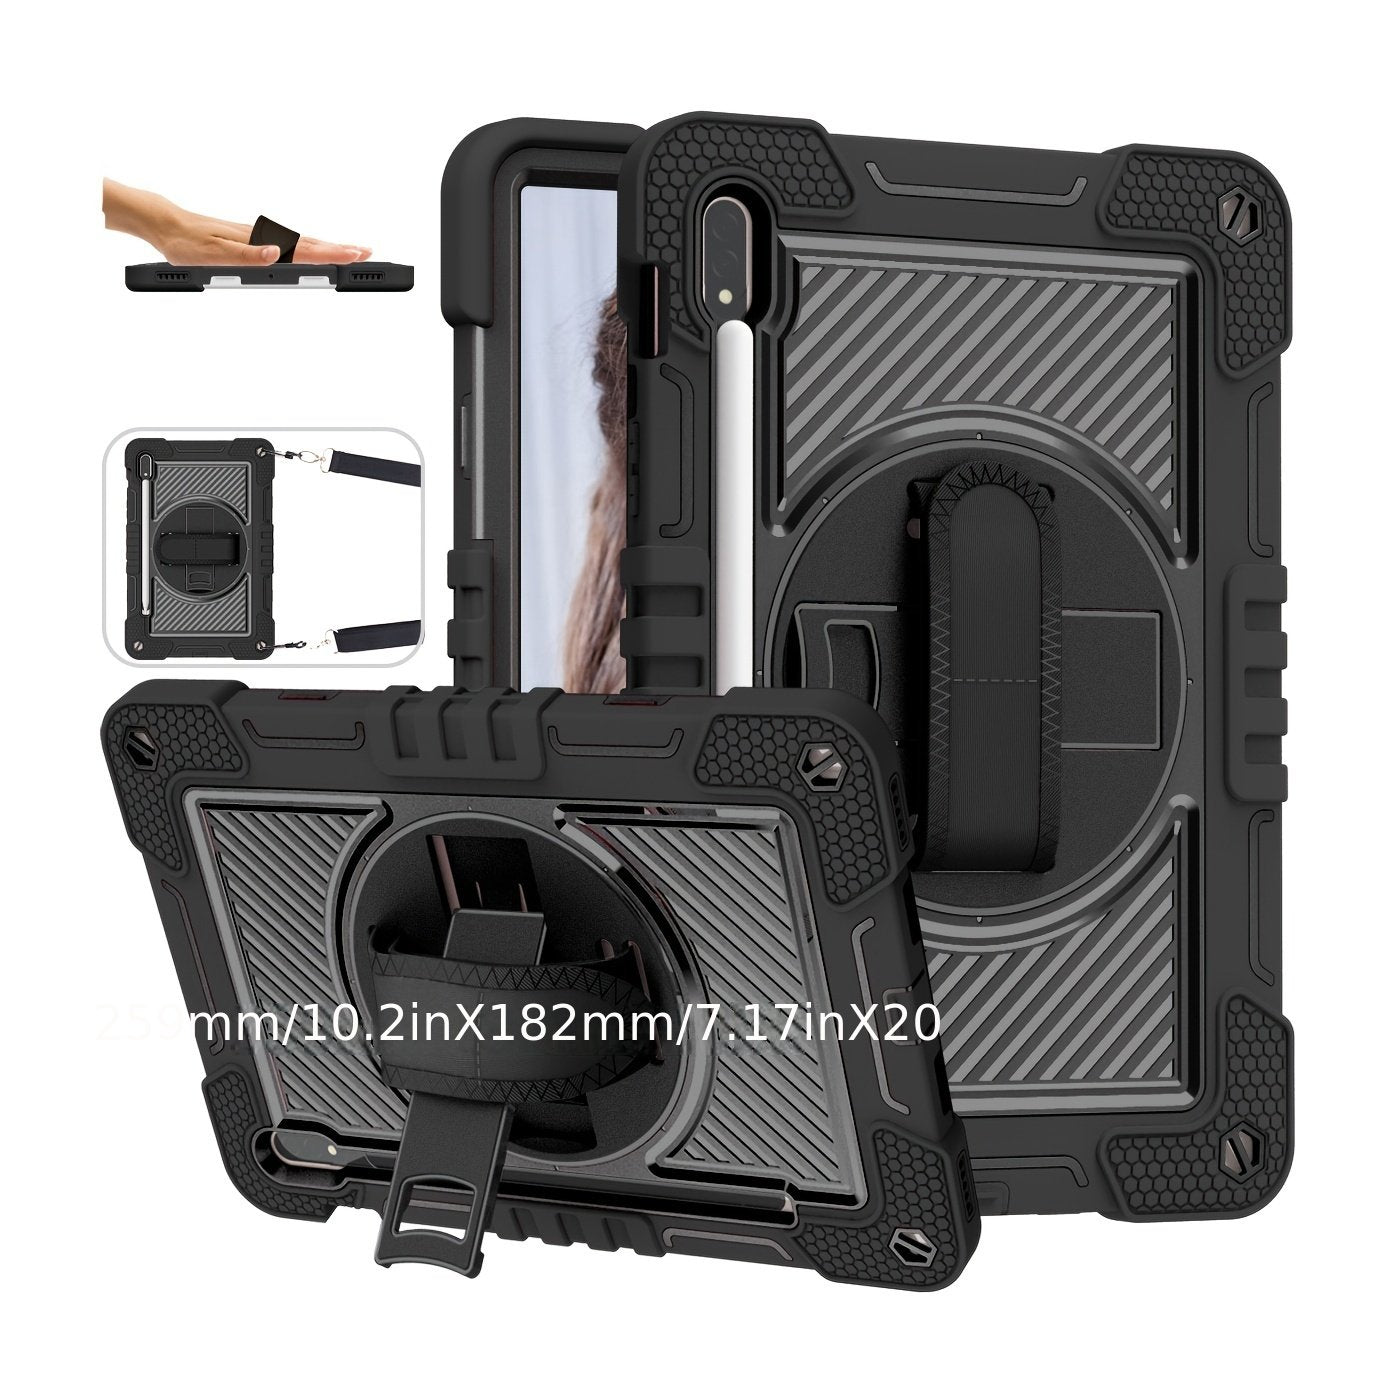 For Samsung Galaxy Tab A7 Lite A8 S6 Lite S7 FE S8 PLUS Case Military Grade Heavy Duty Shockproof Cover - Pencil Holder - Rotating Stand - Hand/Shoulder Strap - Black